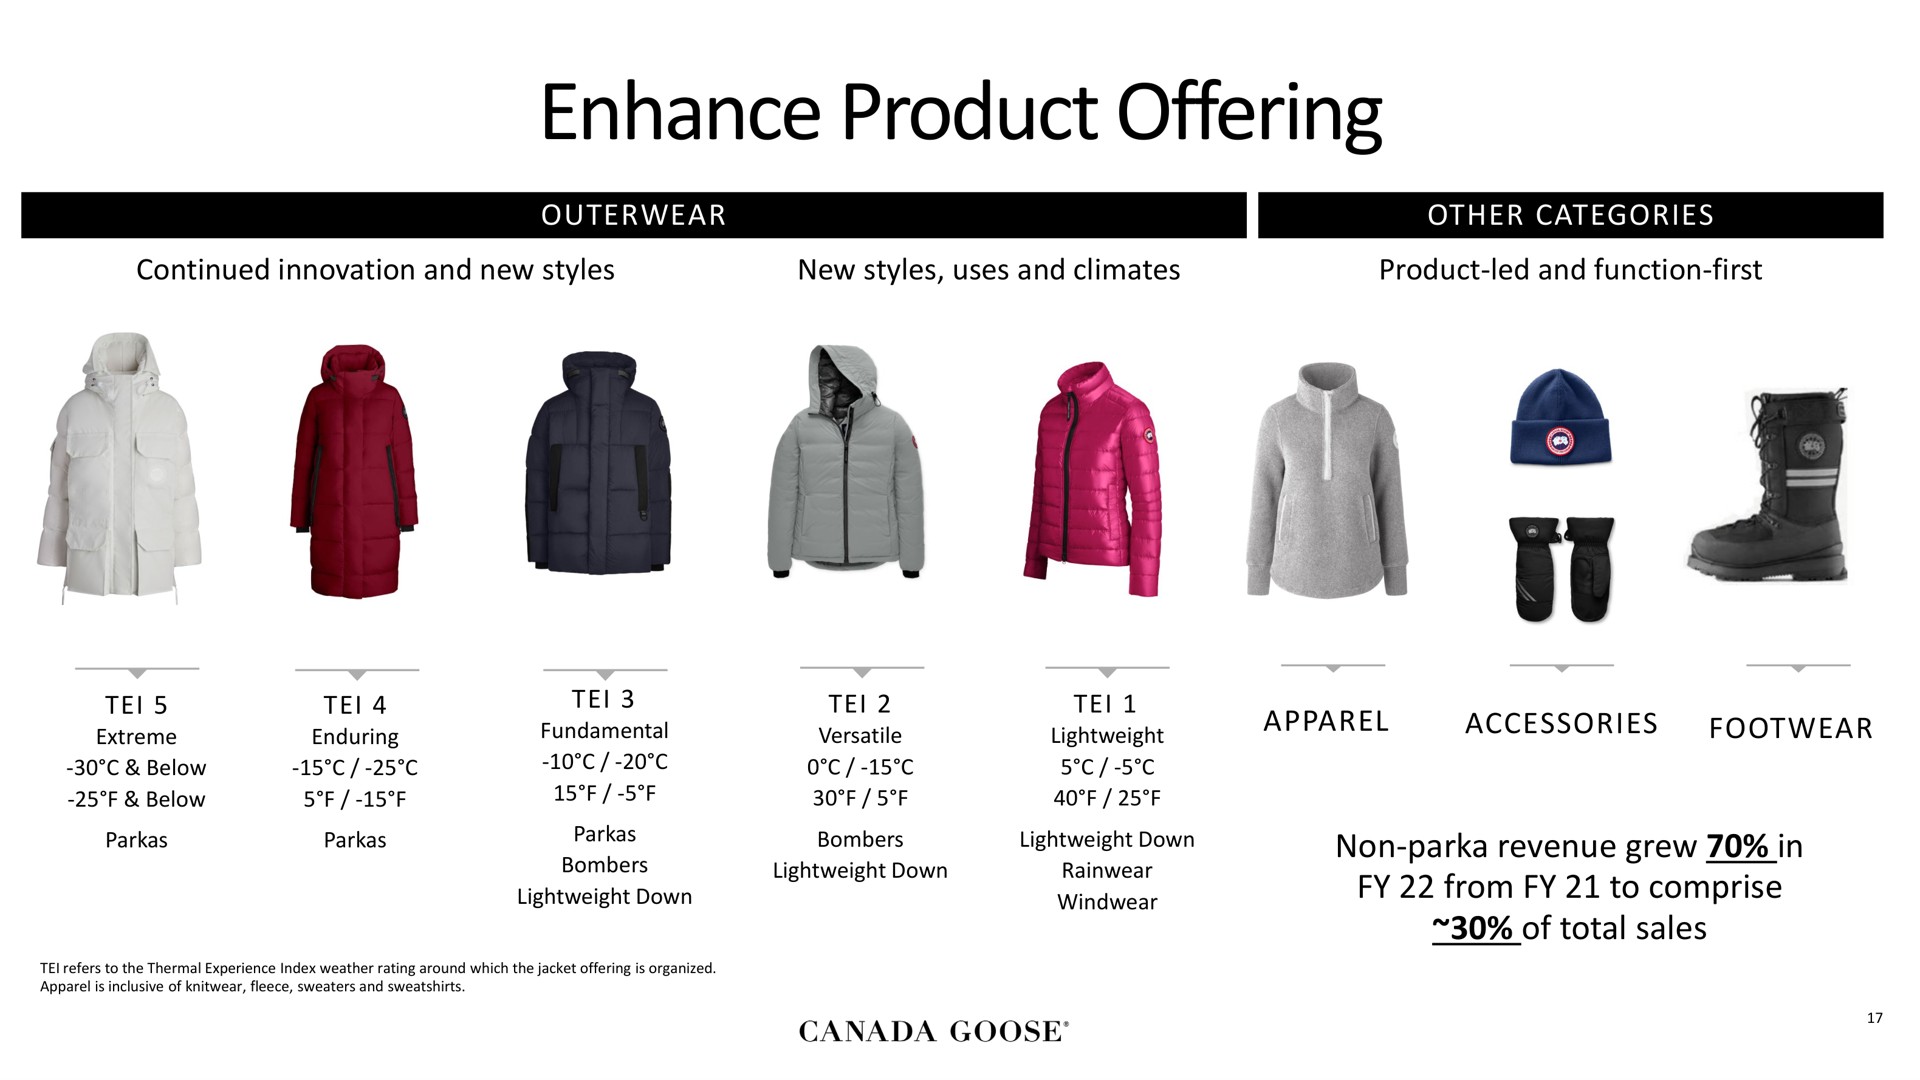 enhance product offering | Canada Goose